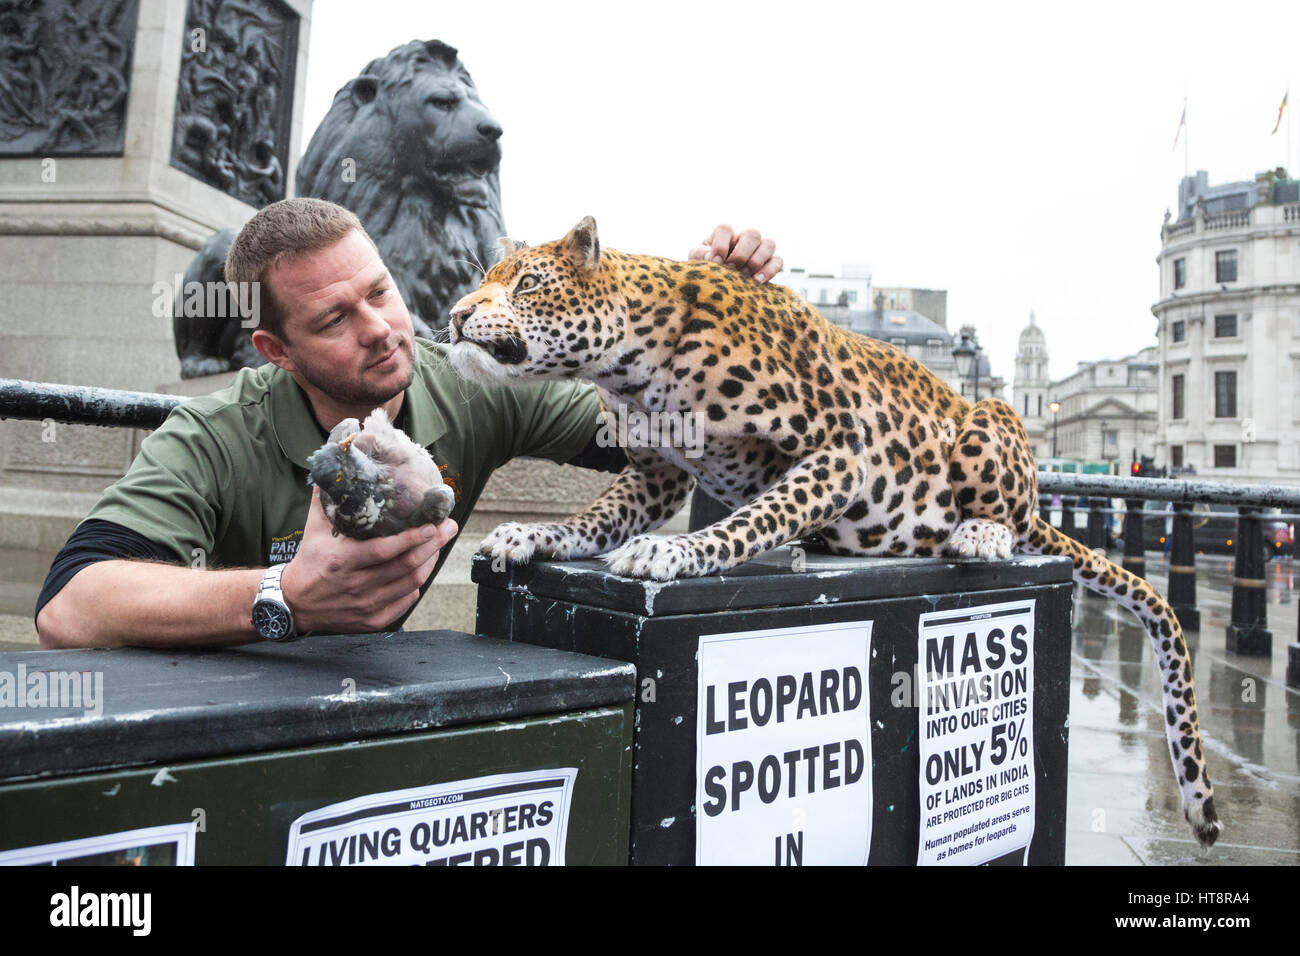 London, UK. 8 March 2017. Charles, a member of John Nolan Studio with the  leopard. Nat Geo WILD unveils the world's first hyper realistic animatronic  leopard in London's Trafalgar Square to mark